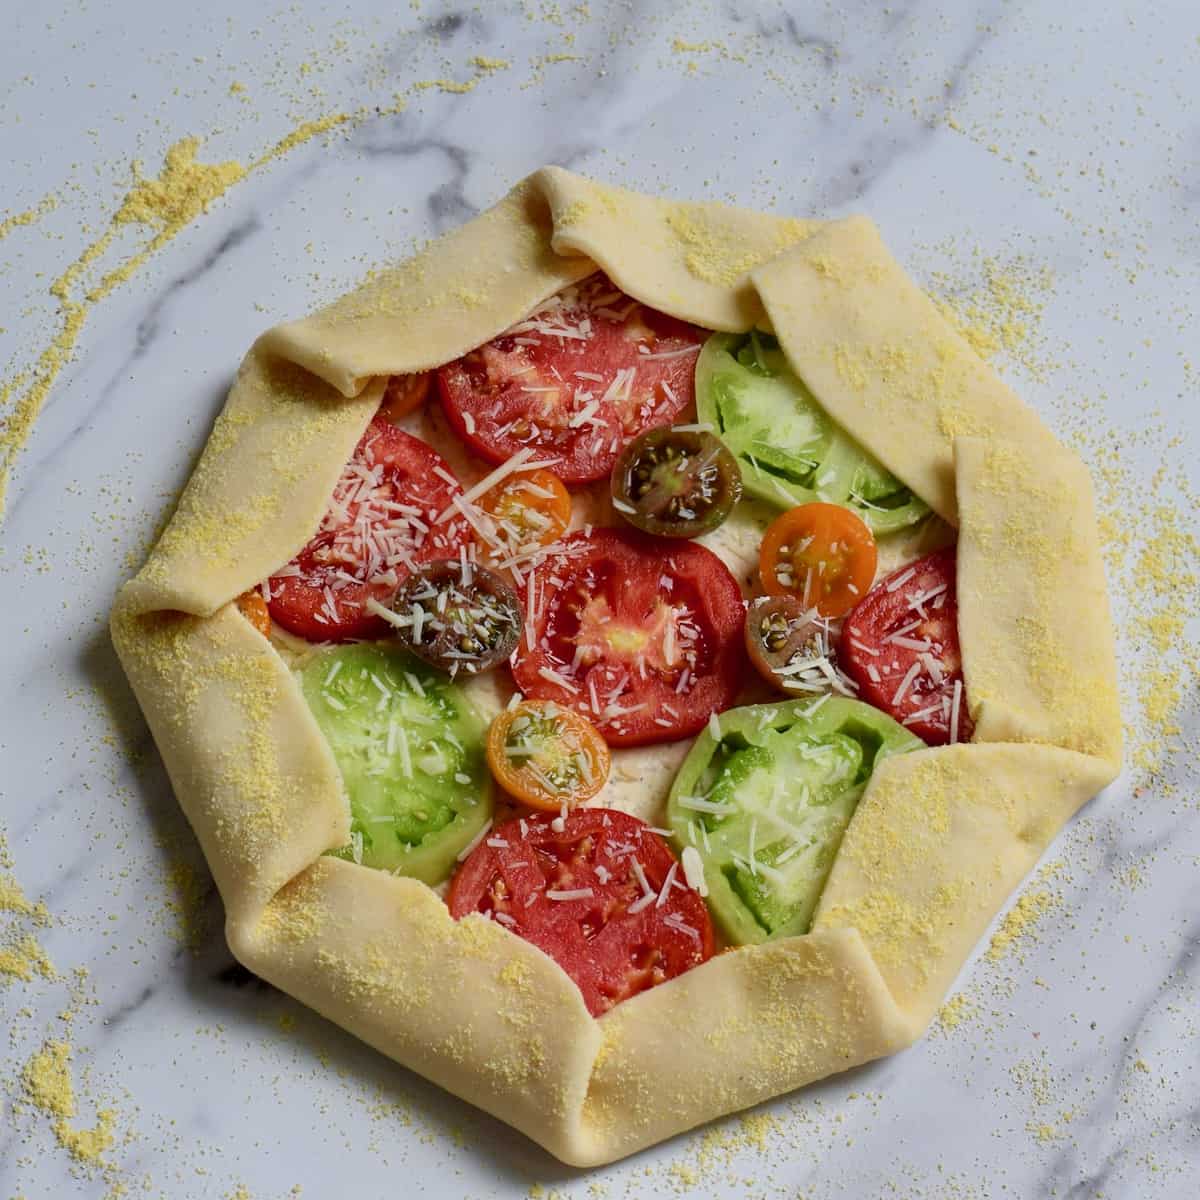 Tomato Galette unbaked on marble surface.